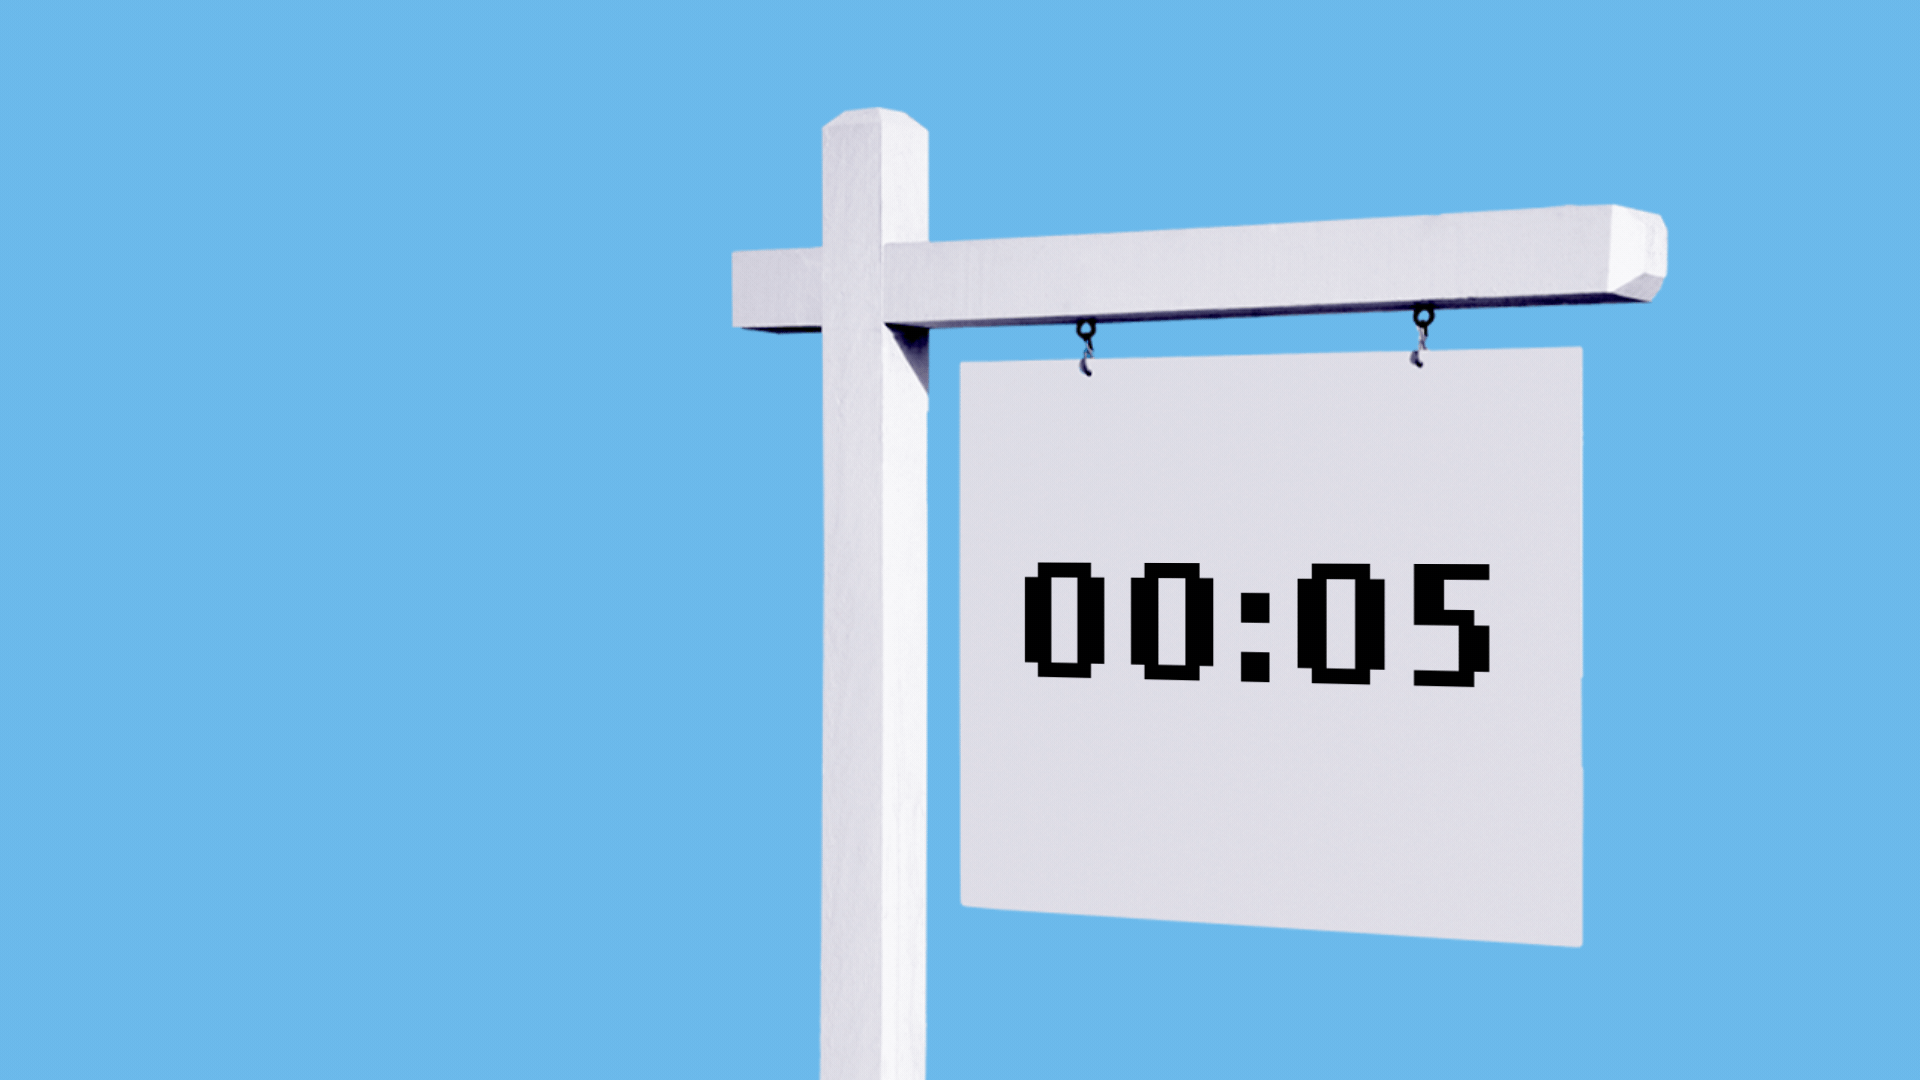 Illustration of a "for sale" sign with a digital clock counting down from 5 seconds, then showing the blinking word "sold."